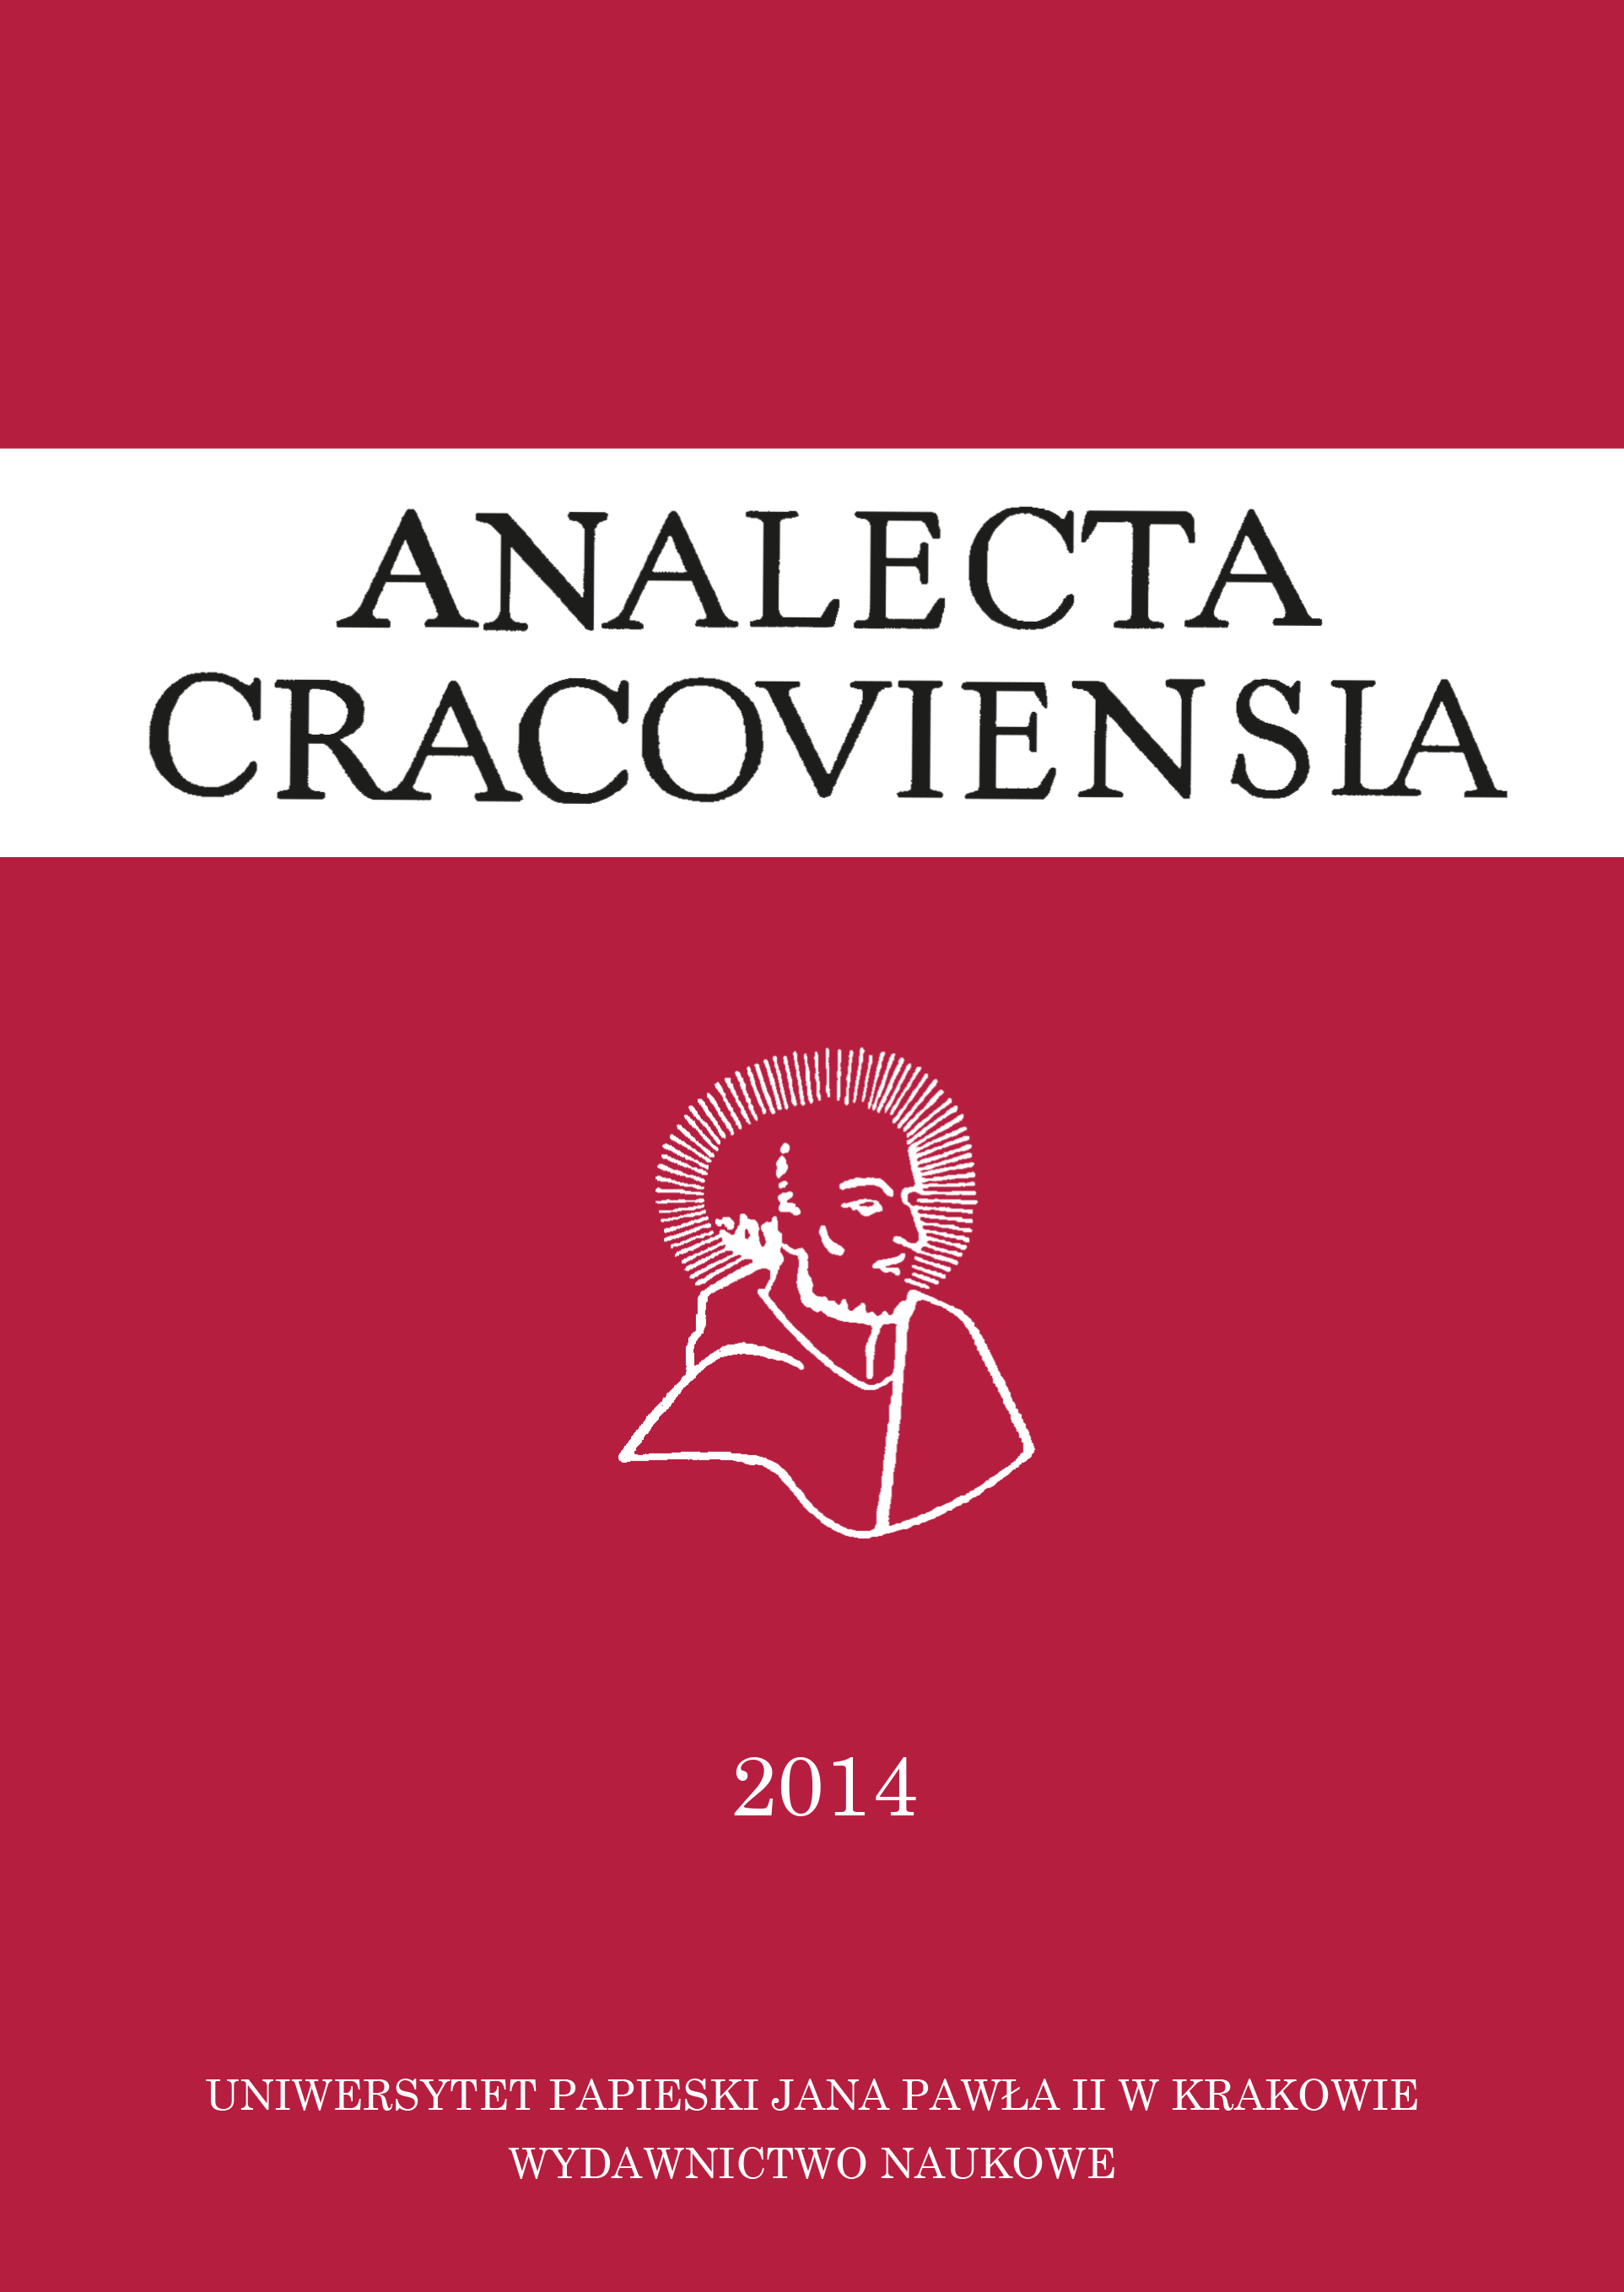 Letter to the Editor-in-Chief of "Analecta Cracoviensia" Cover Image